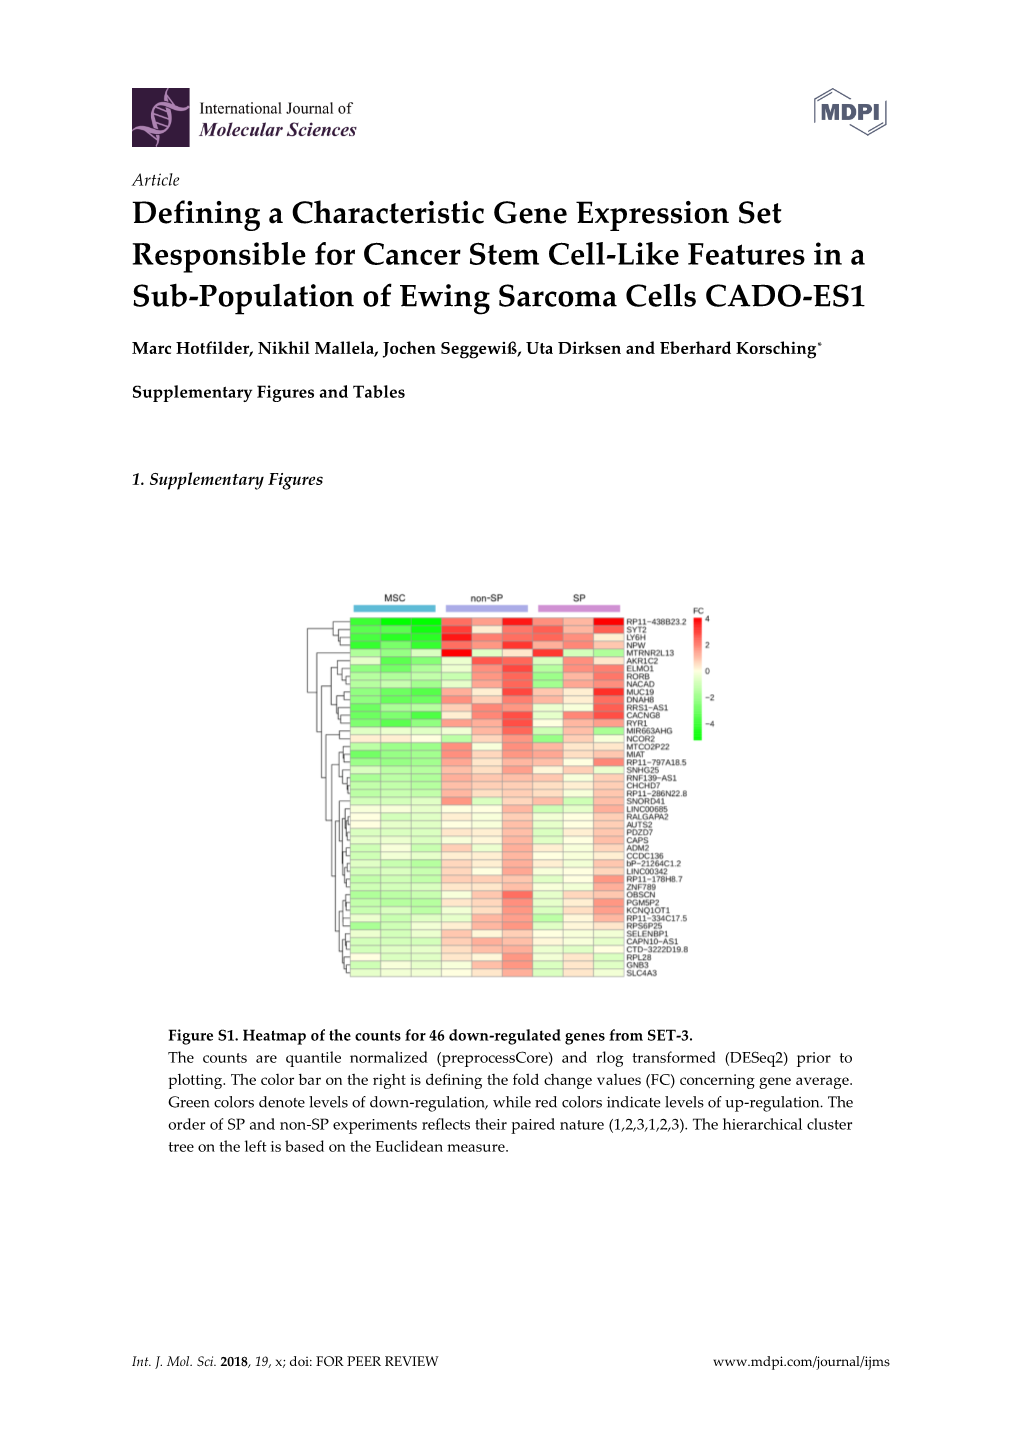 Defining a Characteristic Gene Expression Set Responsible for Cancer Stem Cell-Like Features in a Sub-Population of Ewing Sarcoma Cells CADO-ES1